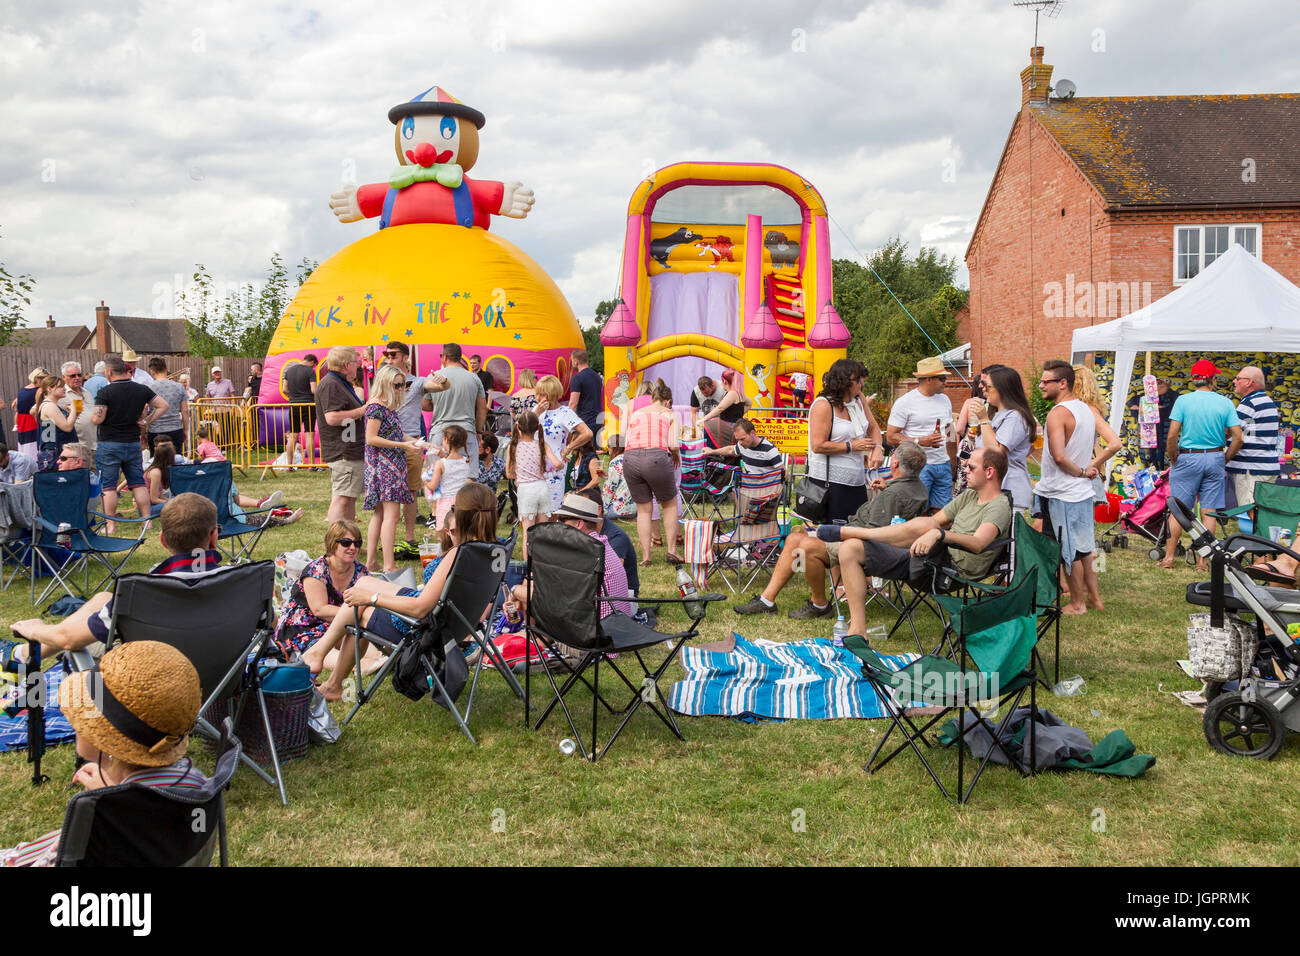 Crick, Northamptonshire, UK. 9th July 2017. Weather. Hot and humid on the second day of the Scarecrow Festival at Crick, lots of people enjoying the day looking at the Scarecrows dotted around the village. Credit: Keith J Smith./Alamy Live News Stock Photo